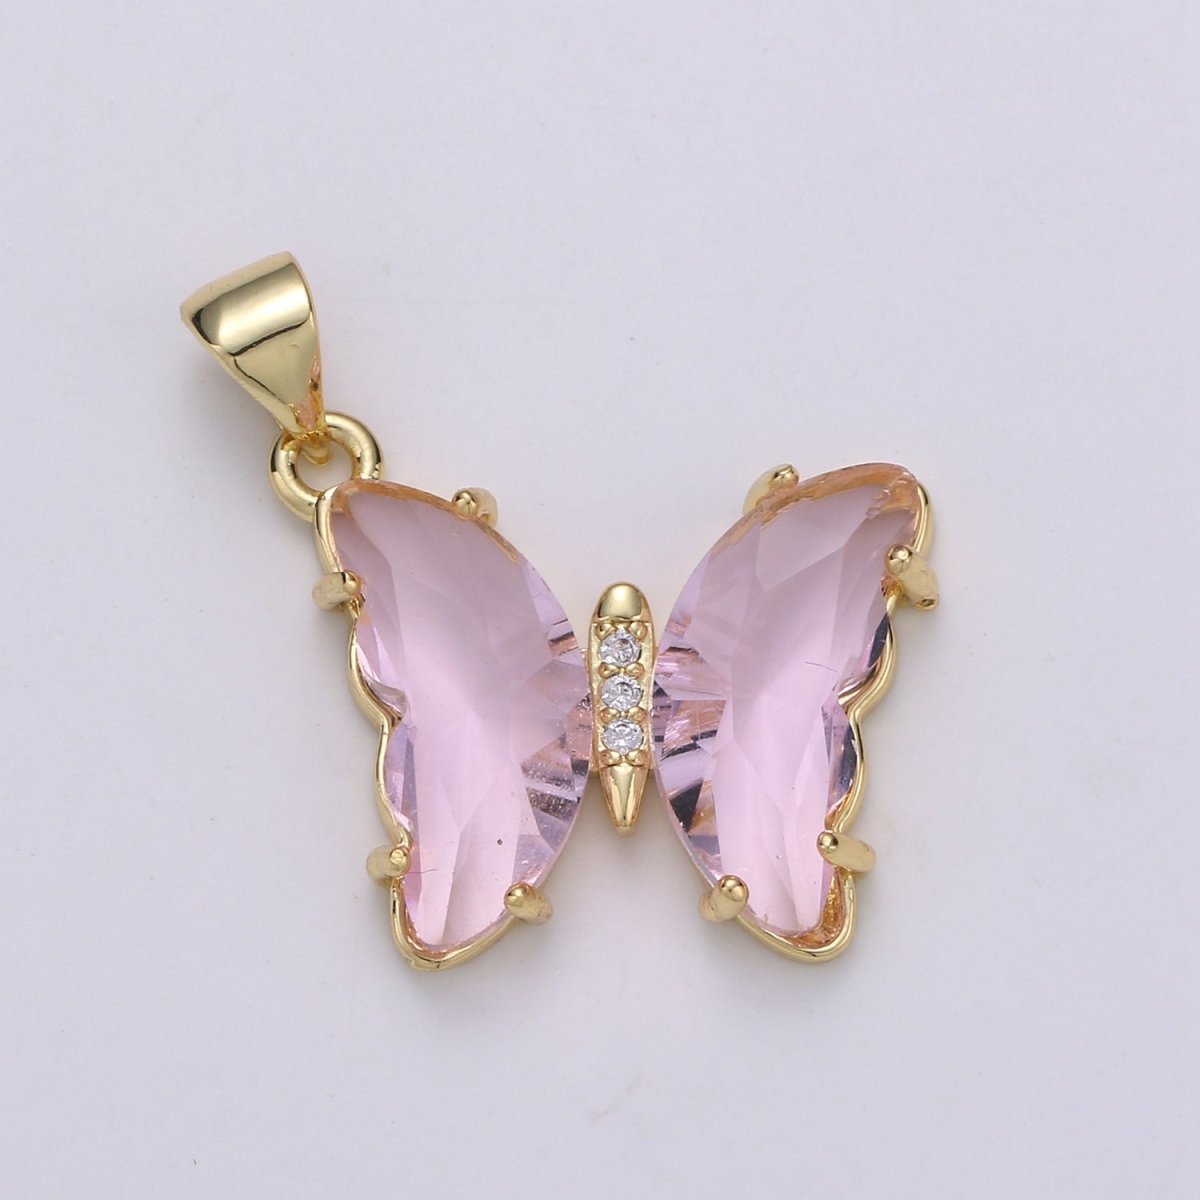 DEL- 1pc 20x17mm Wholesale Gold-Filled Mariposa Butterfly Pendant Charm with Clear Glass Wings, Charms for Necklace Bracelet Anklet Making - DLUXCA